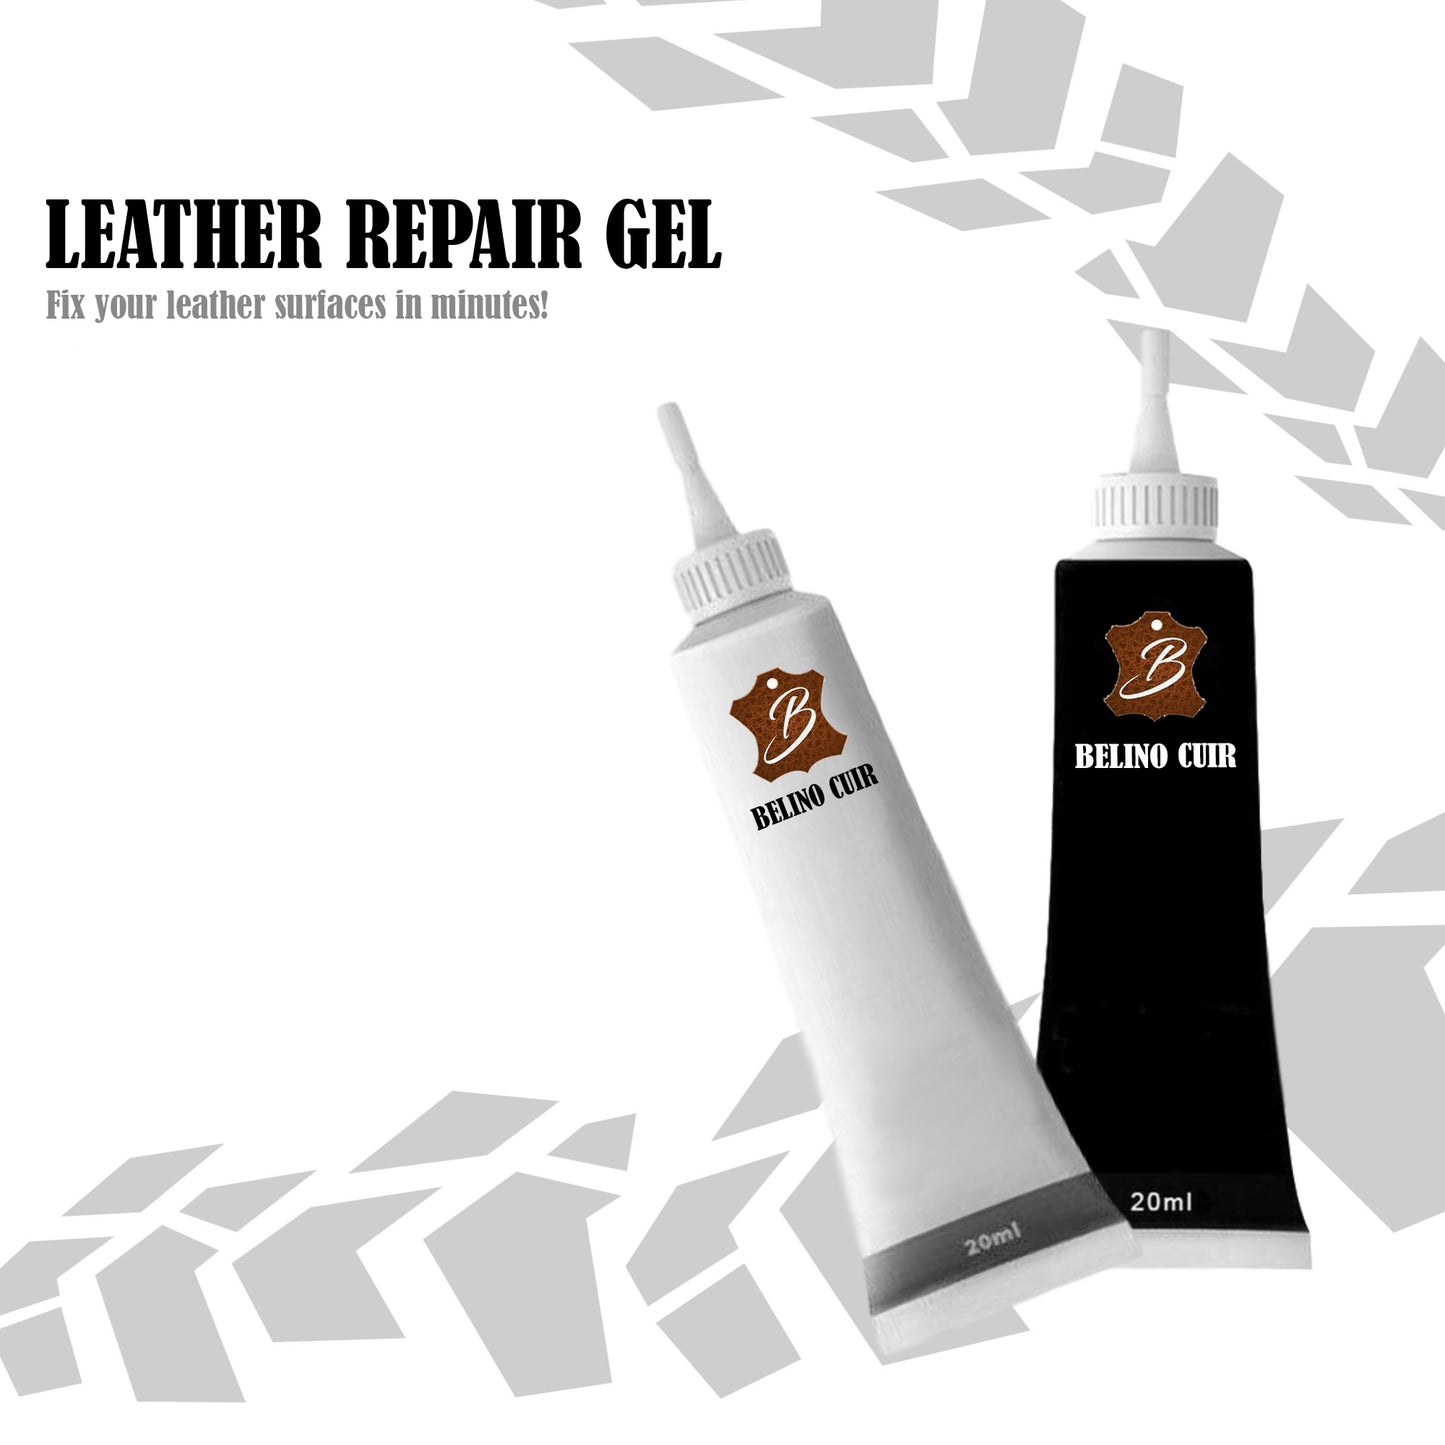 REVOLUTIONARY LEATHER REPAIR GEL - UP TO 50% LAST DAY PROMOTION